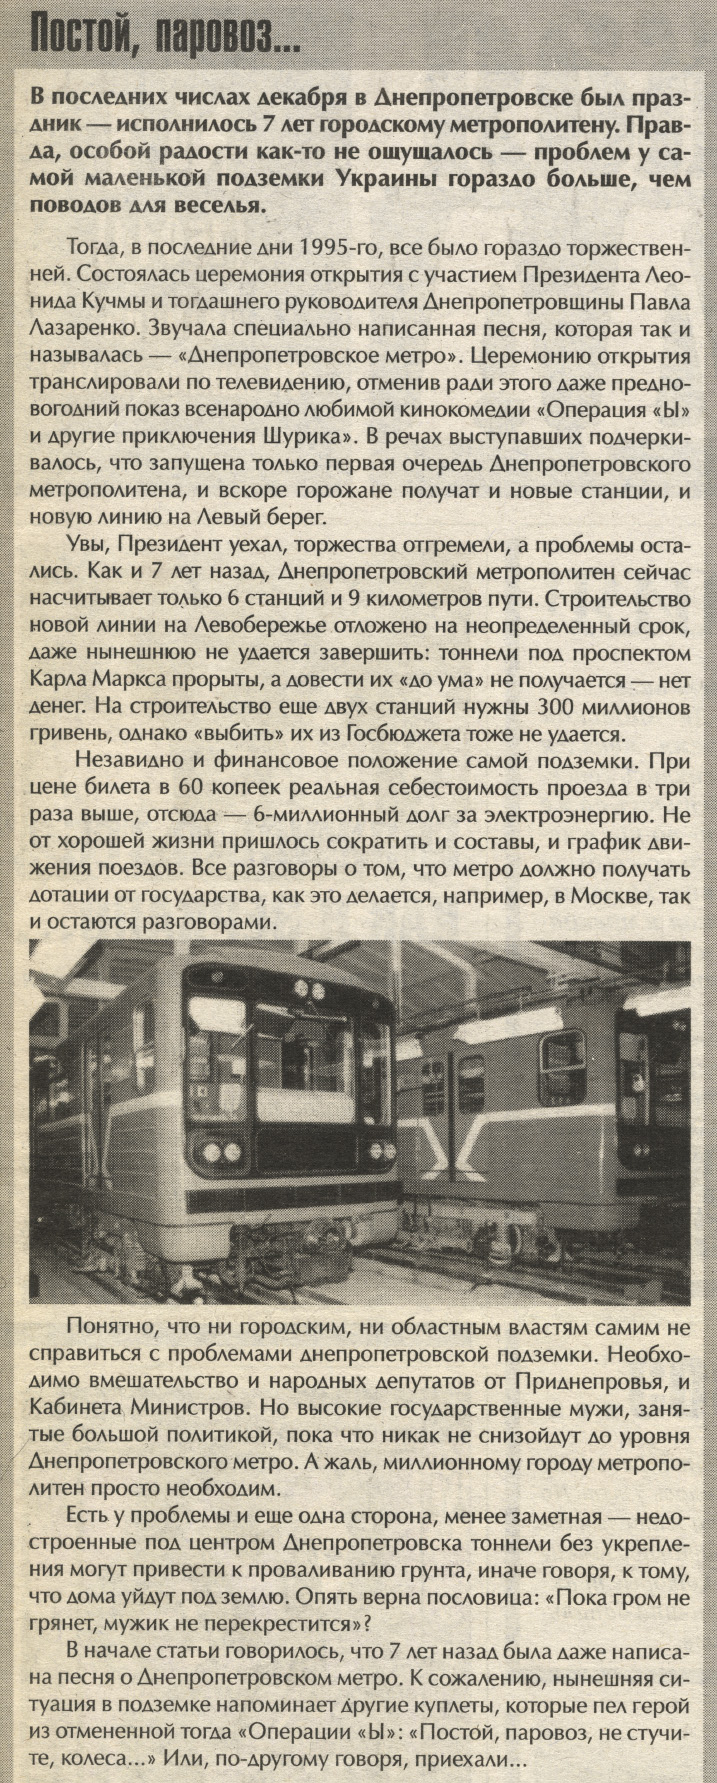 Dnipro — Newspaper and magazine articles: Subway; Transport articles